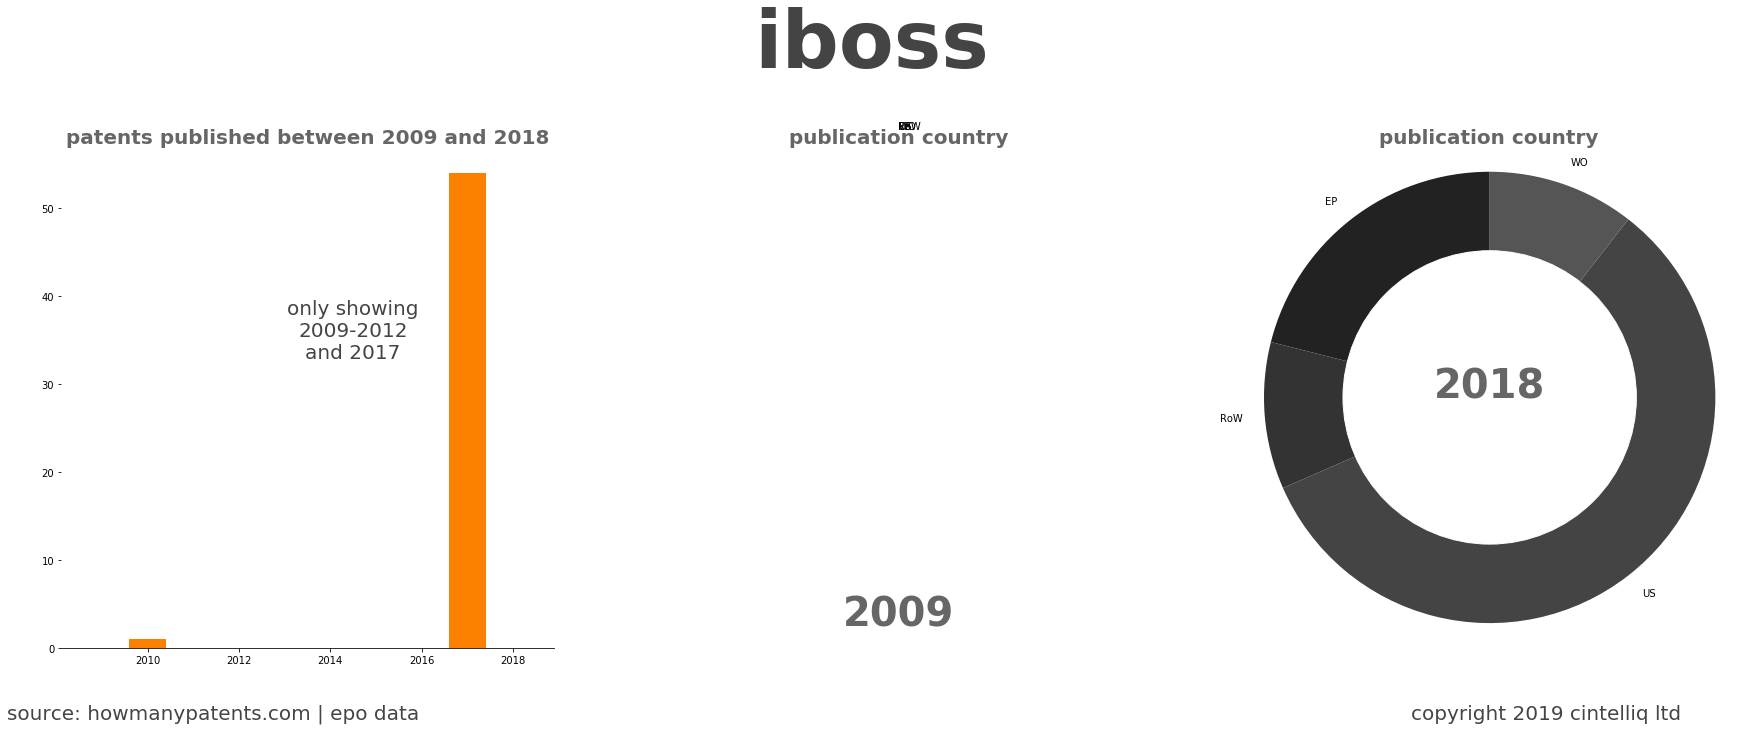 summary of patents for Iboss